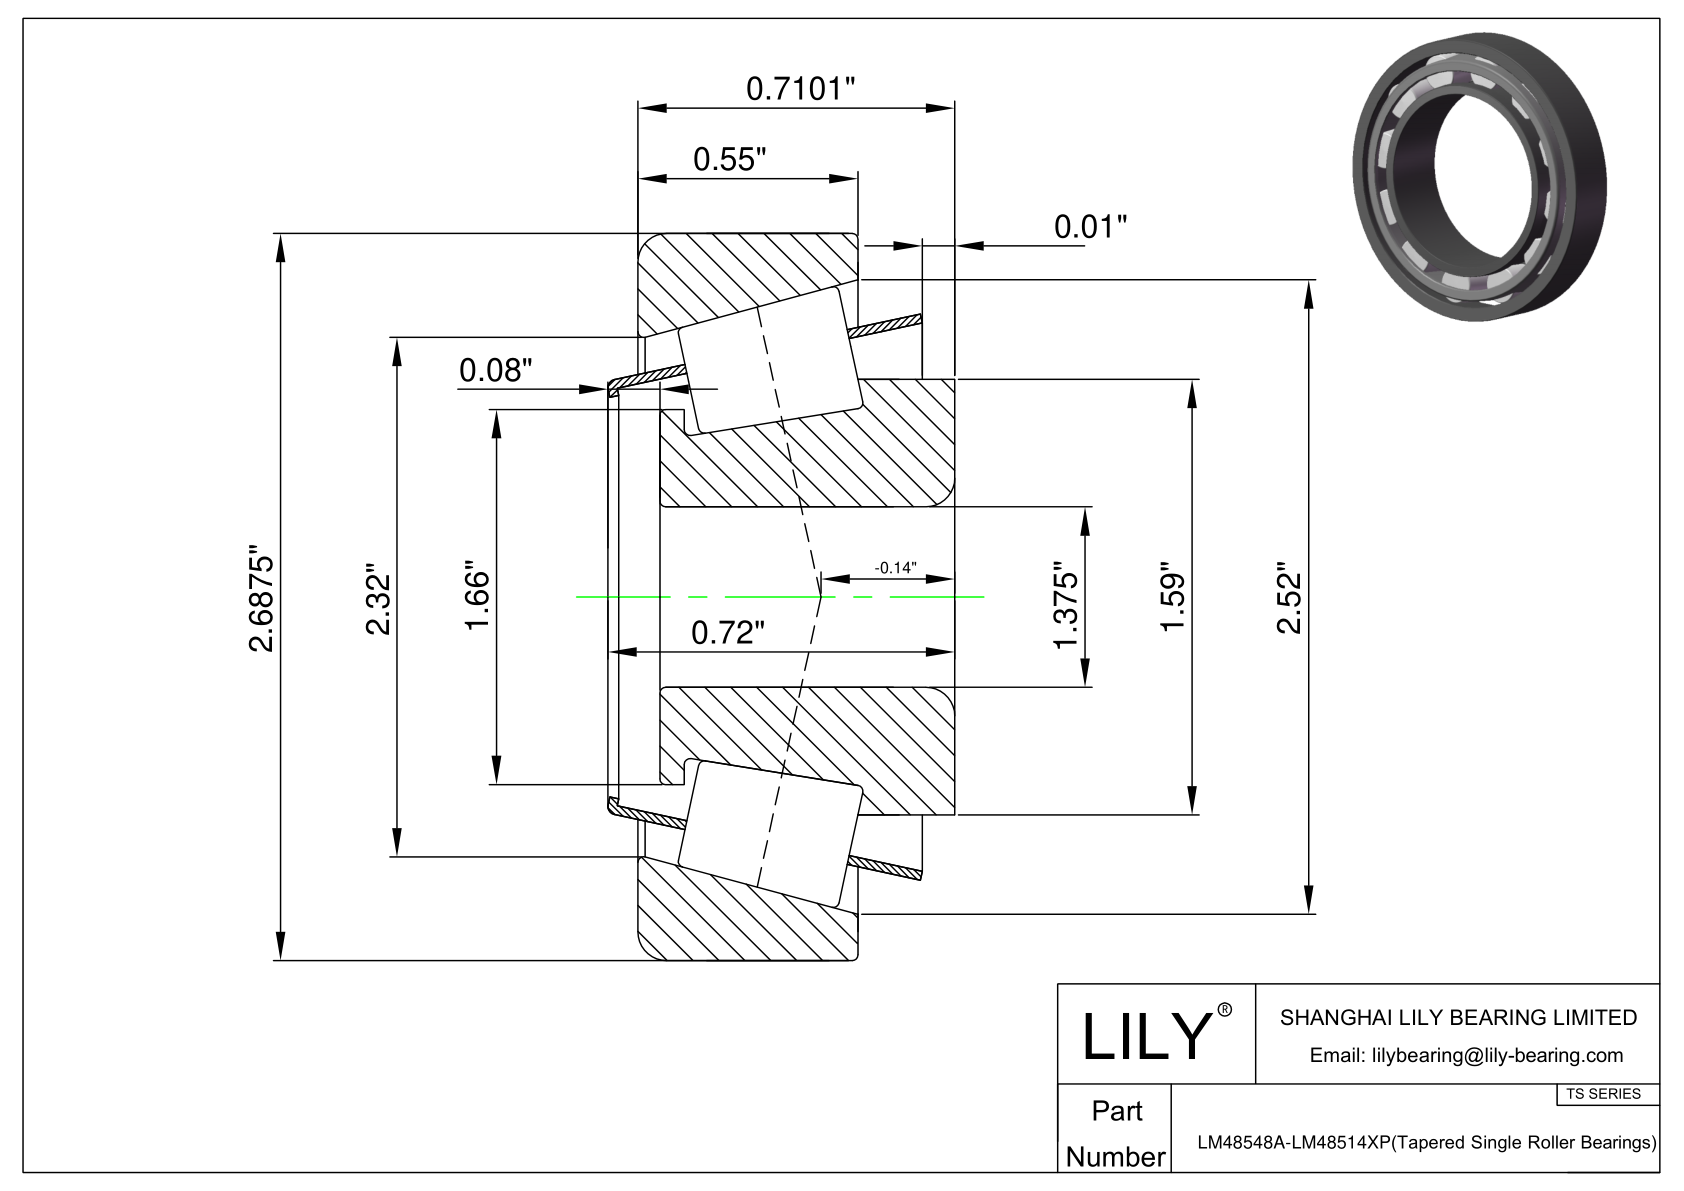 LM48548A-LM48514XP TS (Tapered Single Roller Bearings) (Imperial) cad drawing